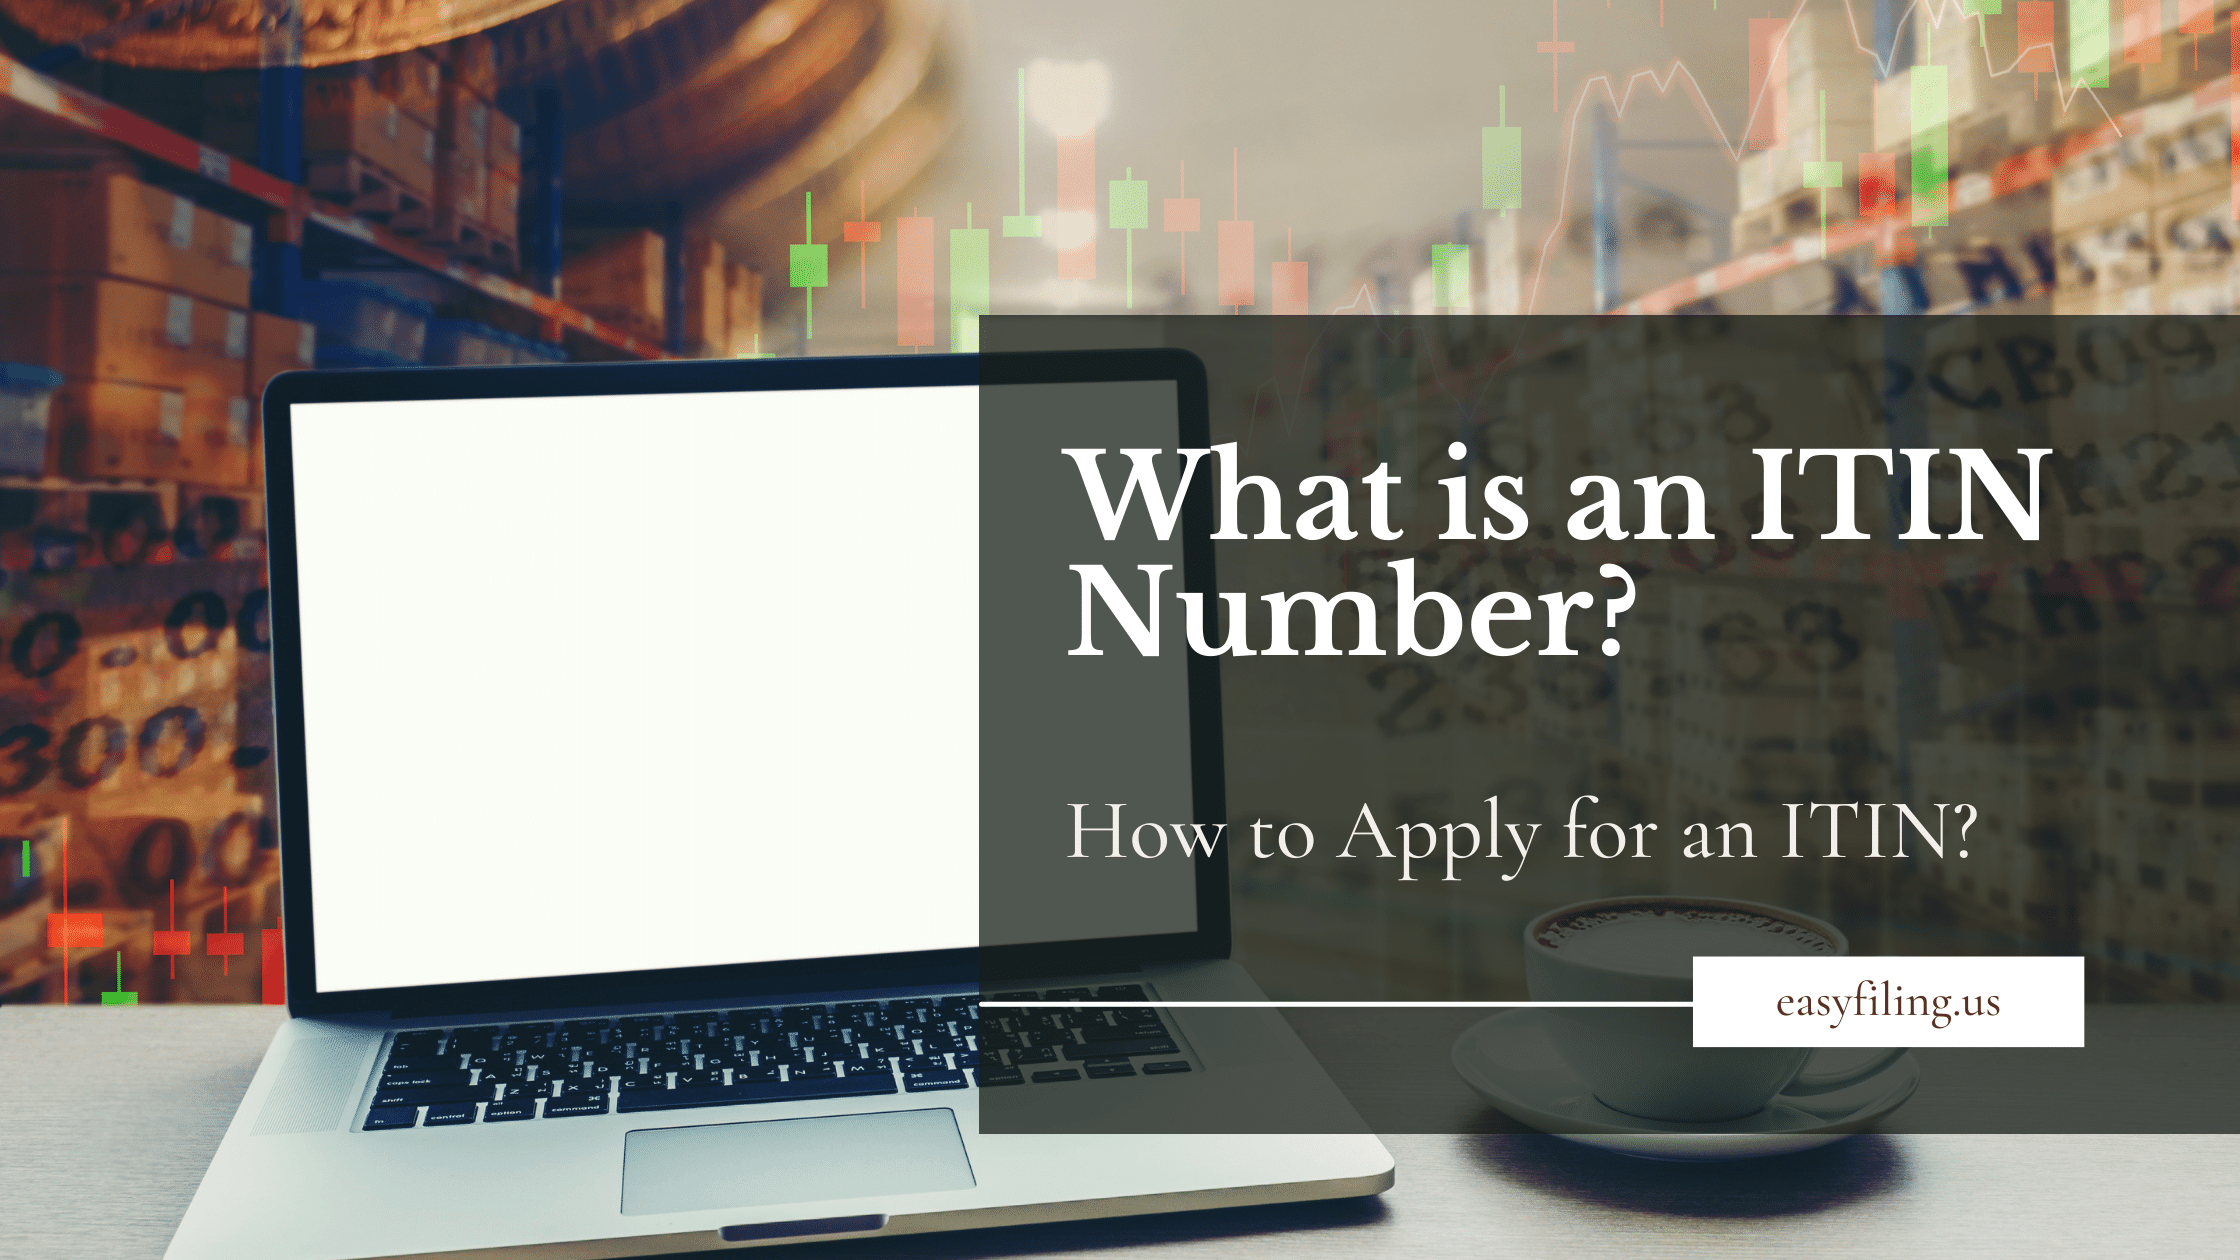 What is an ITIN Number